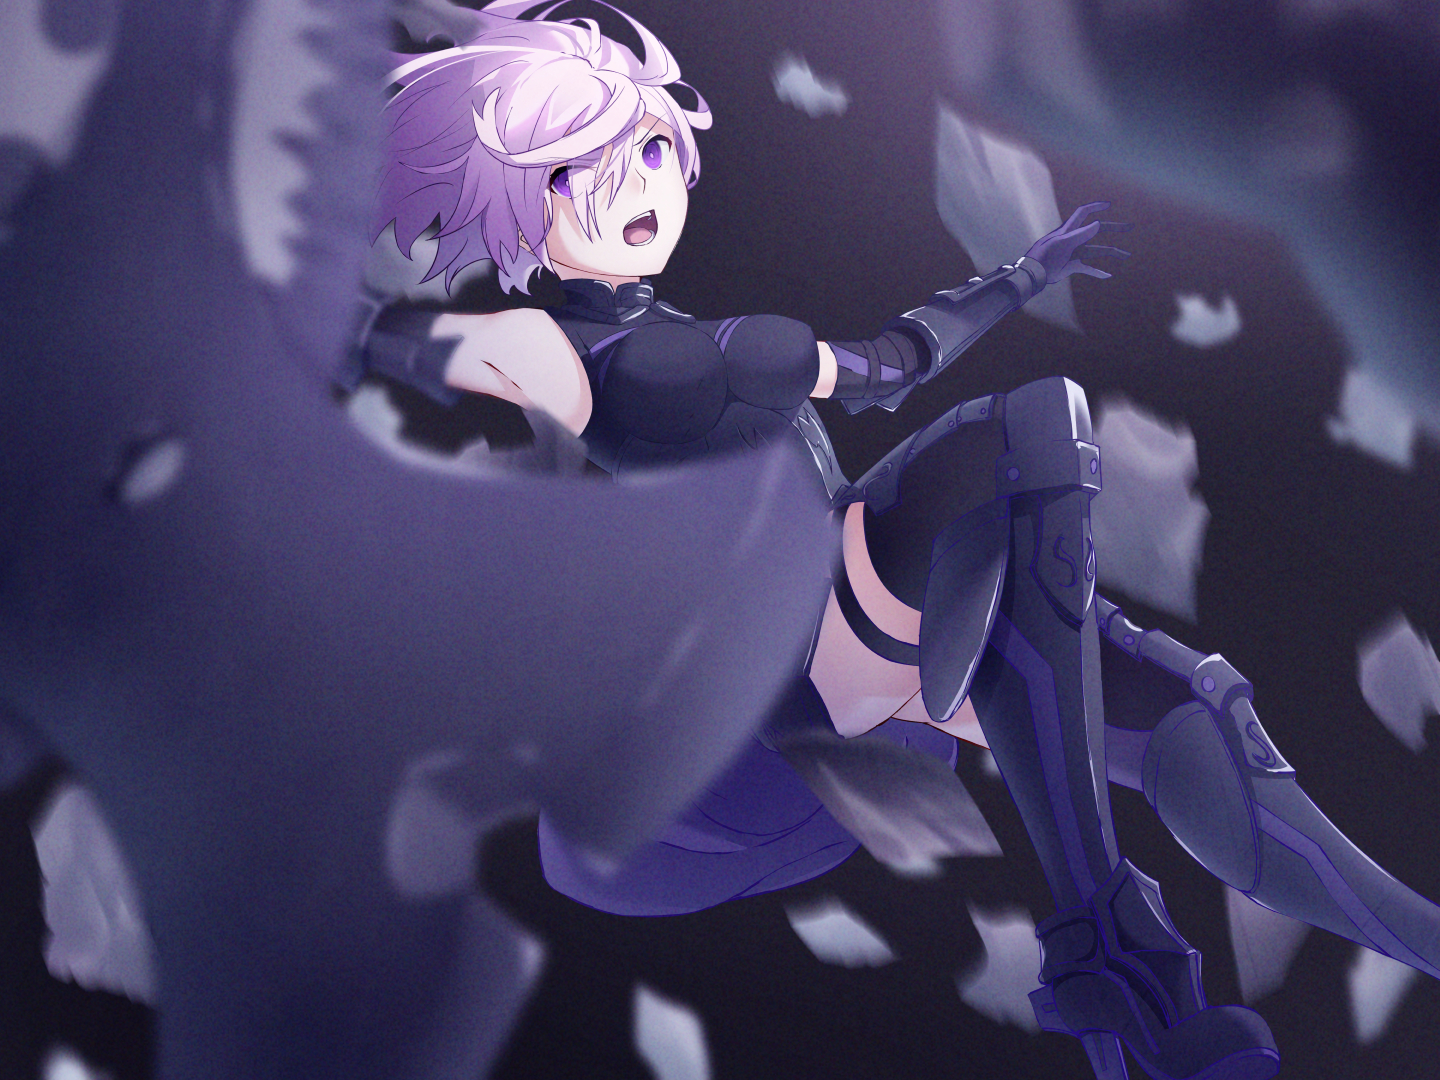 Anime 1440x1080 anime anime girls yama (artist) Fate/Grand Order Fate series big boobs thighs female warrior armored woman falling 2D short hair purple hair Mash Kyrielight purple eyes open mouth looking away bangs hair over one eye fan art fighting